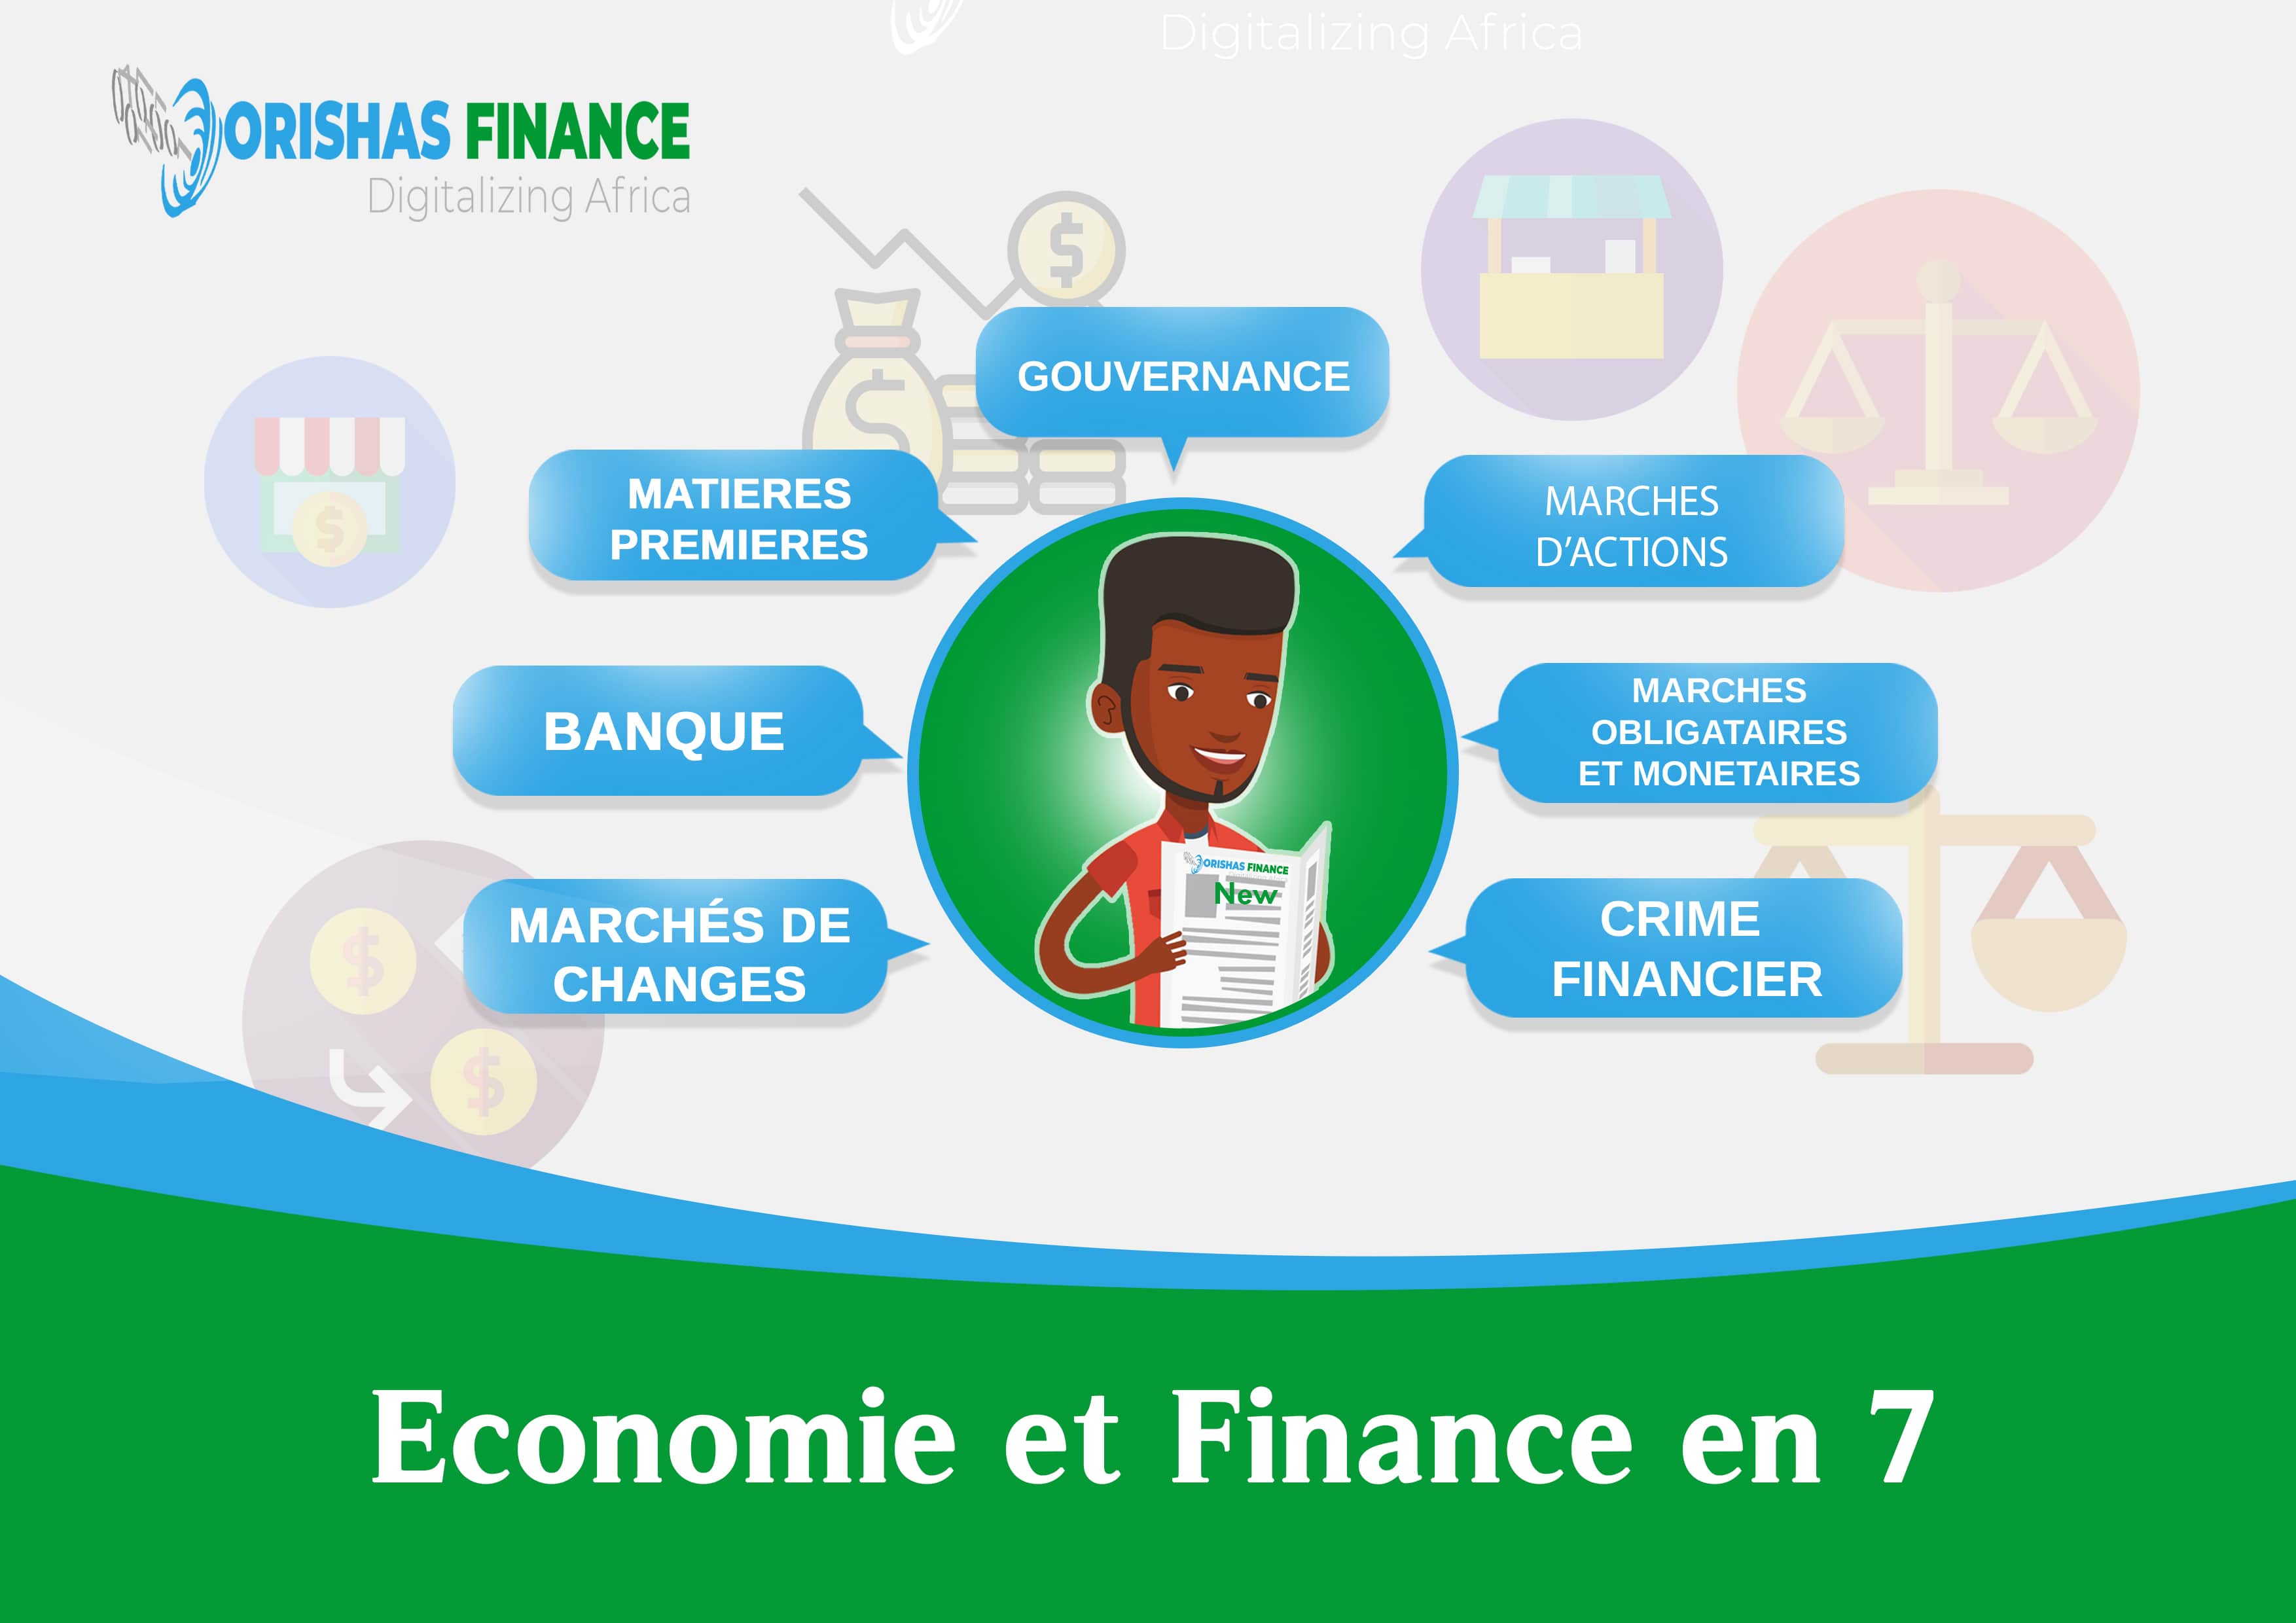  Economy and finance in 7 from April 12 to 16, 2021 